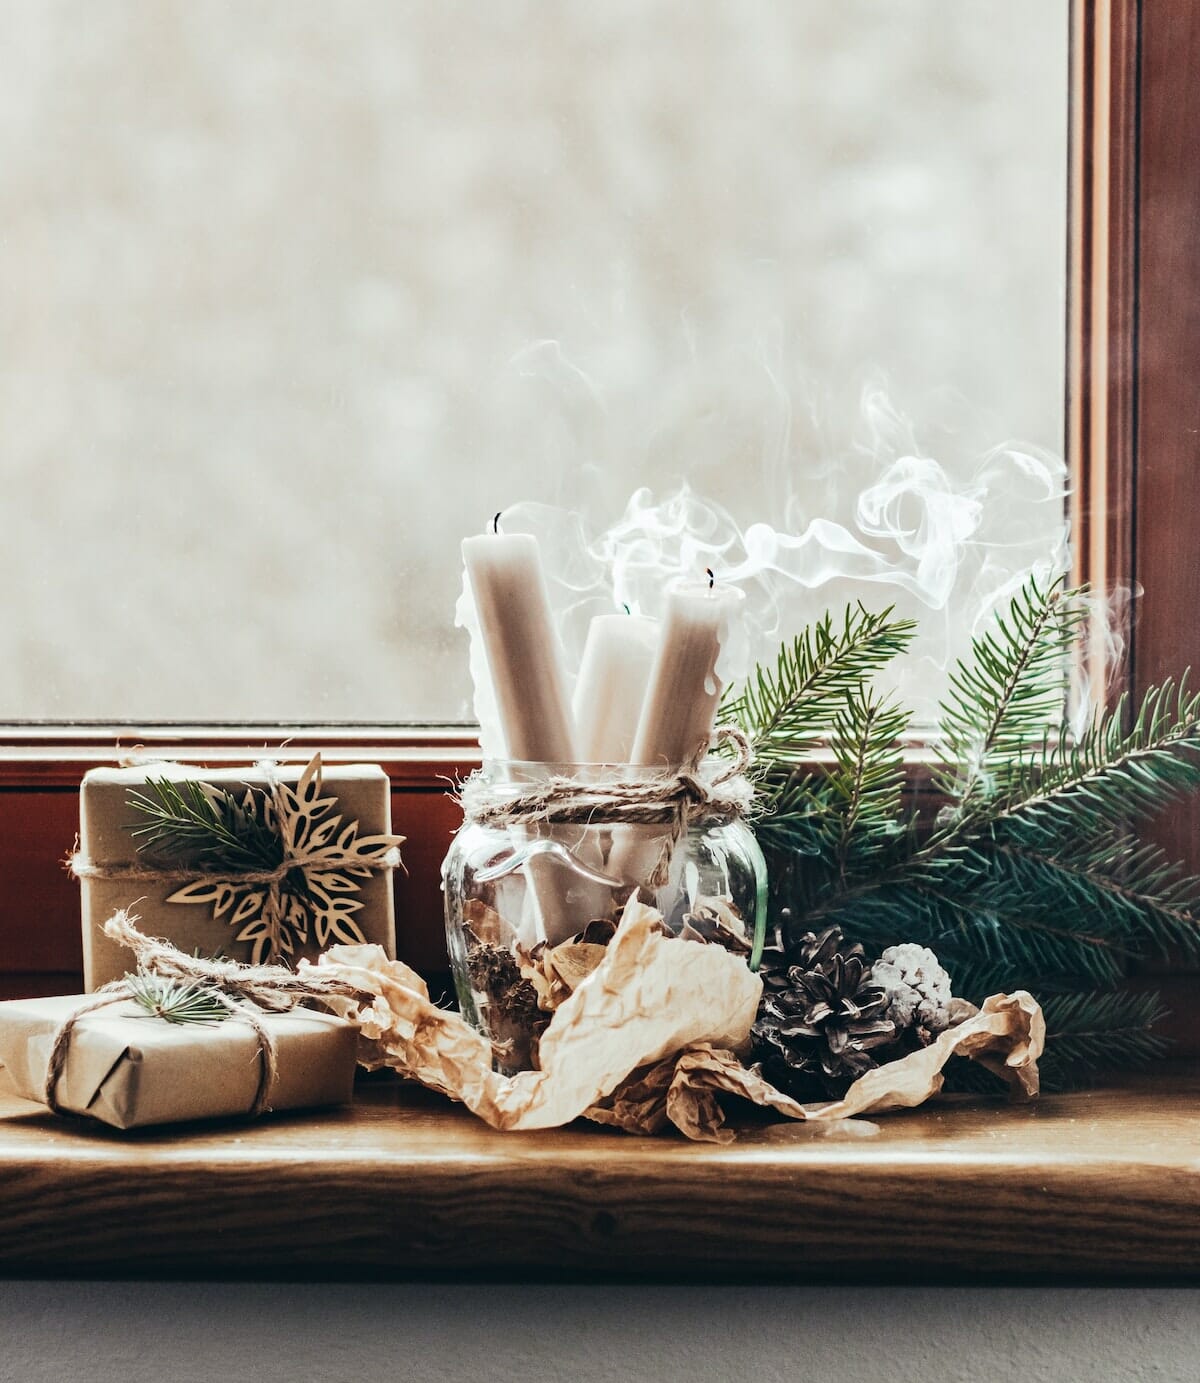 15 Cheap Christmas Decor Ideas That Are Stunning